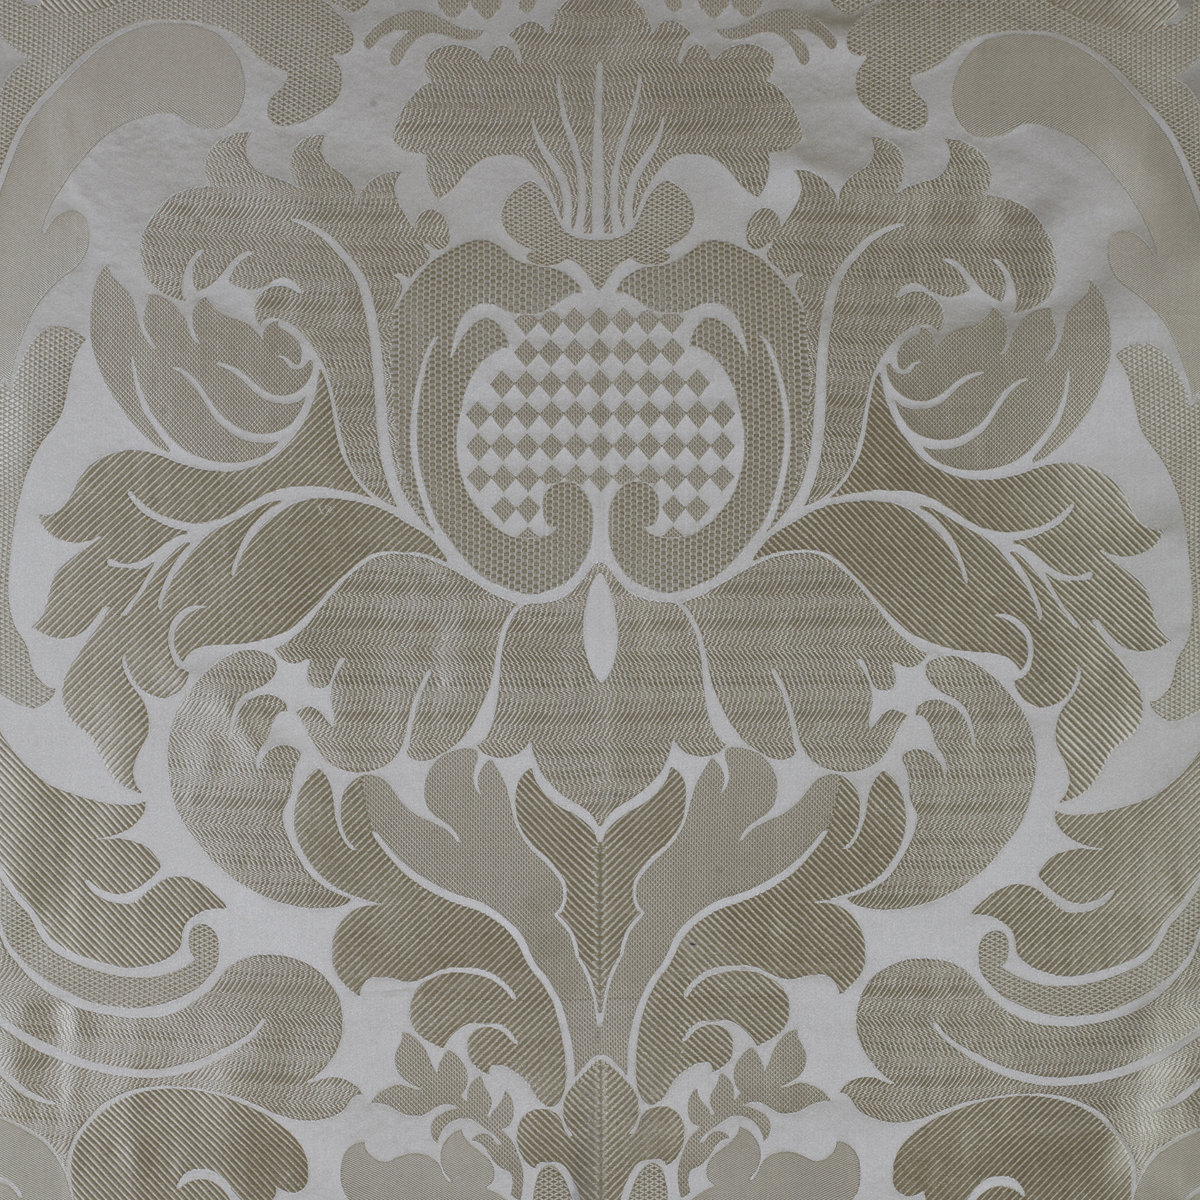 Home View All Colours Beige Large French Damask